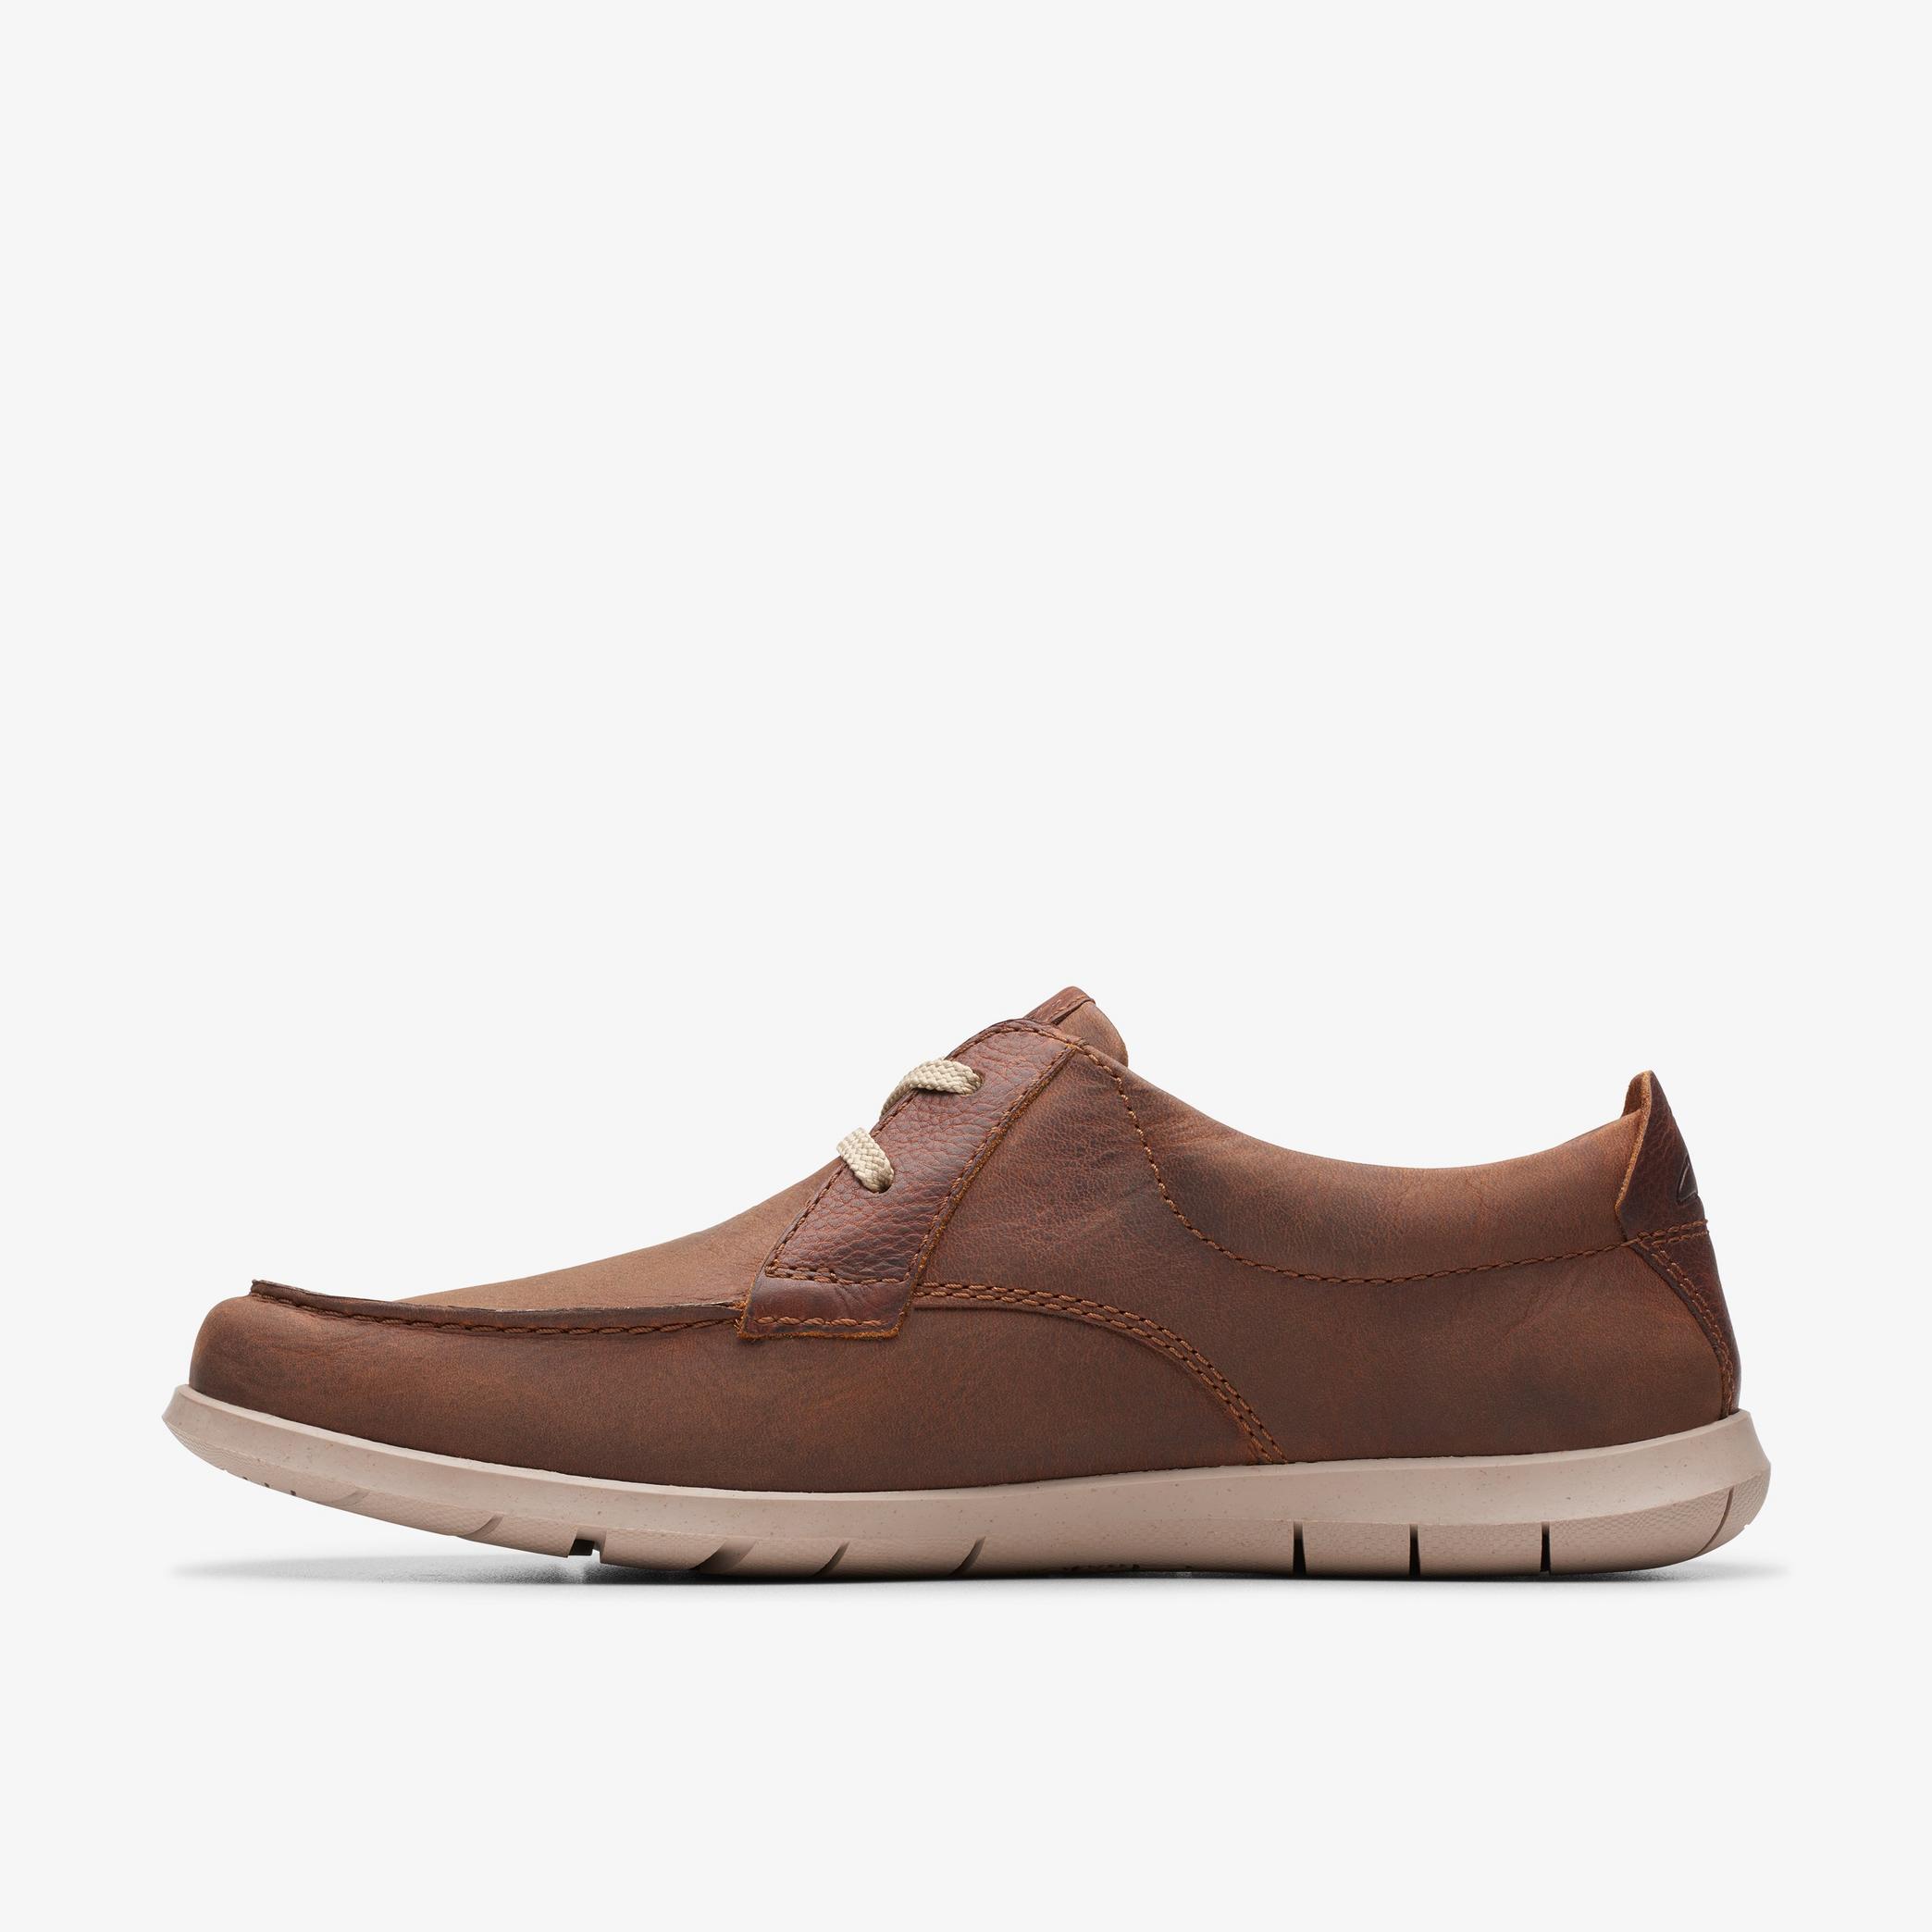 Flexway Lace Dark Tan Leather Boat Shoes, view 2 of 6